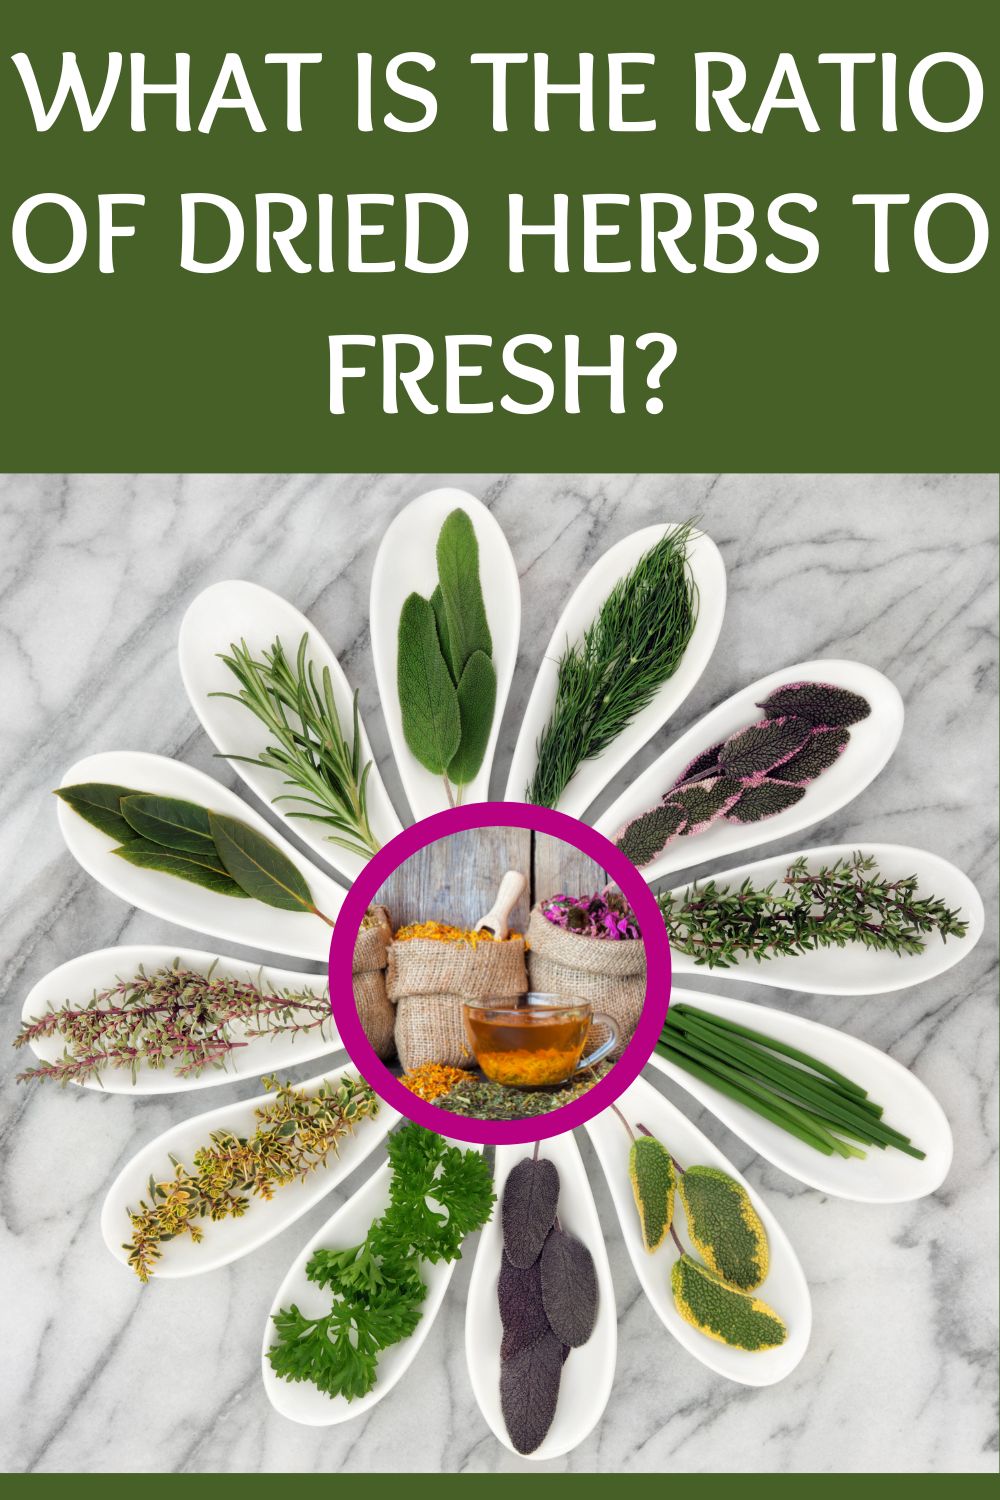 What is the ratio of dried herbs to fresh?